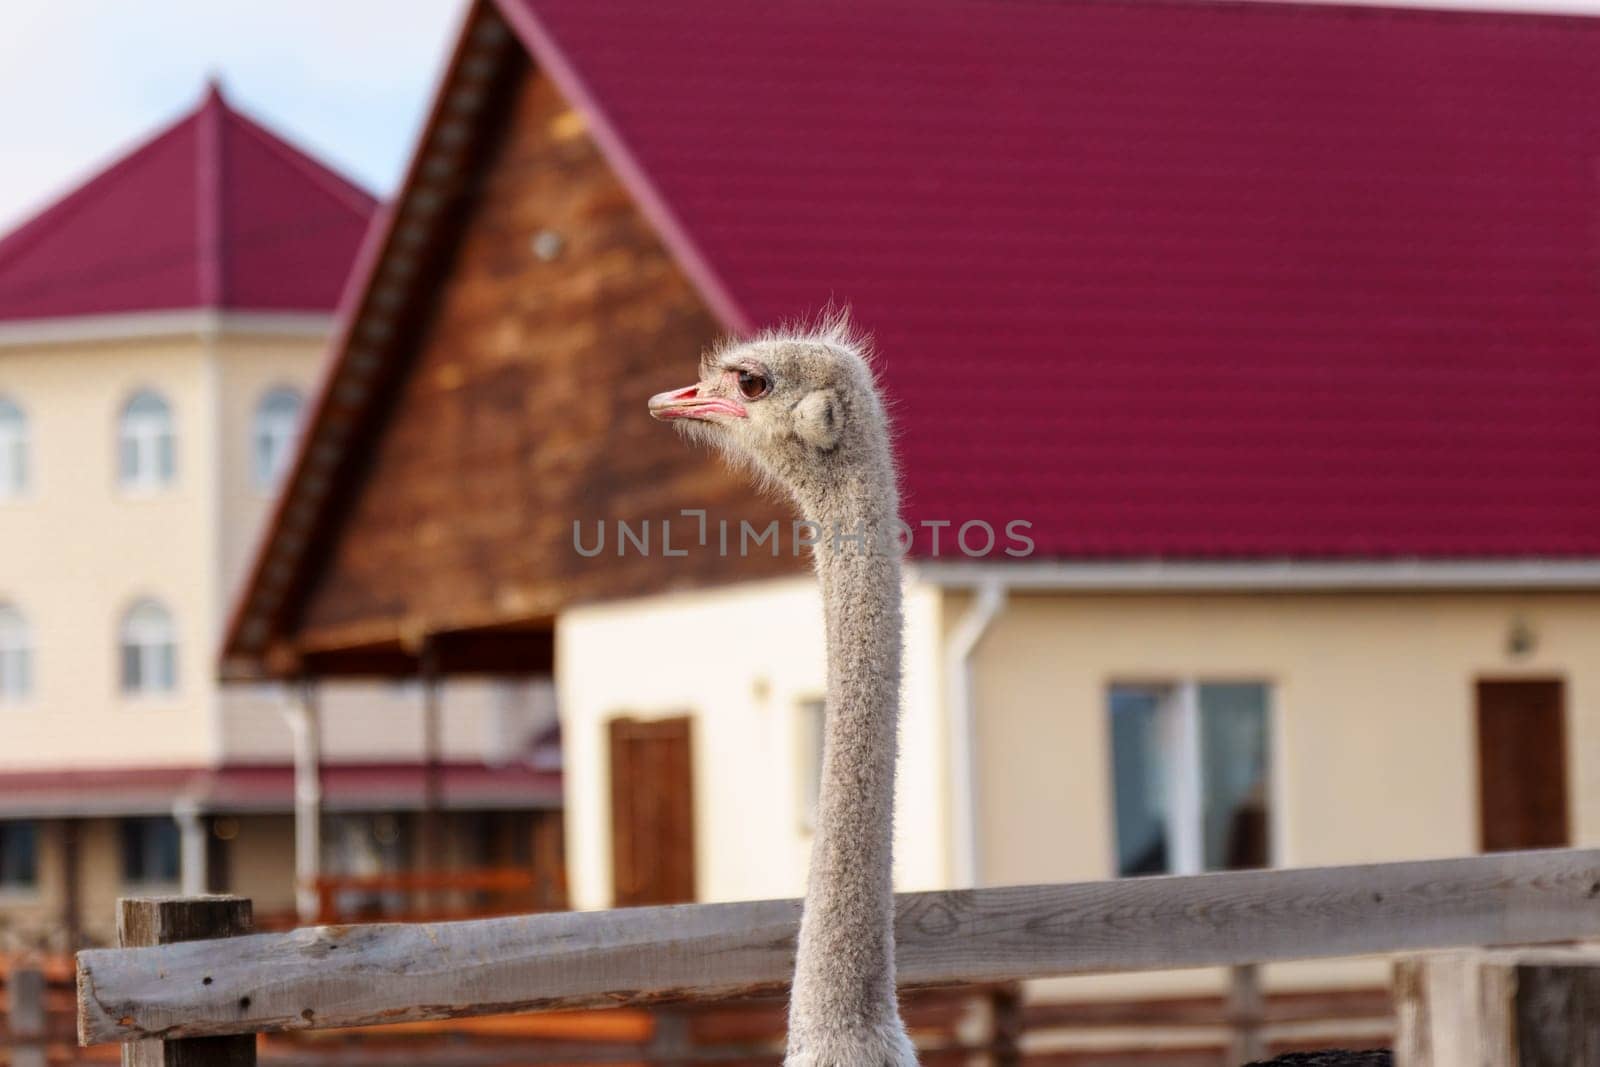 Ostrich is standing in a pen on an ostrich farm, with a barn visible in the background.